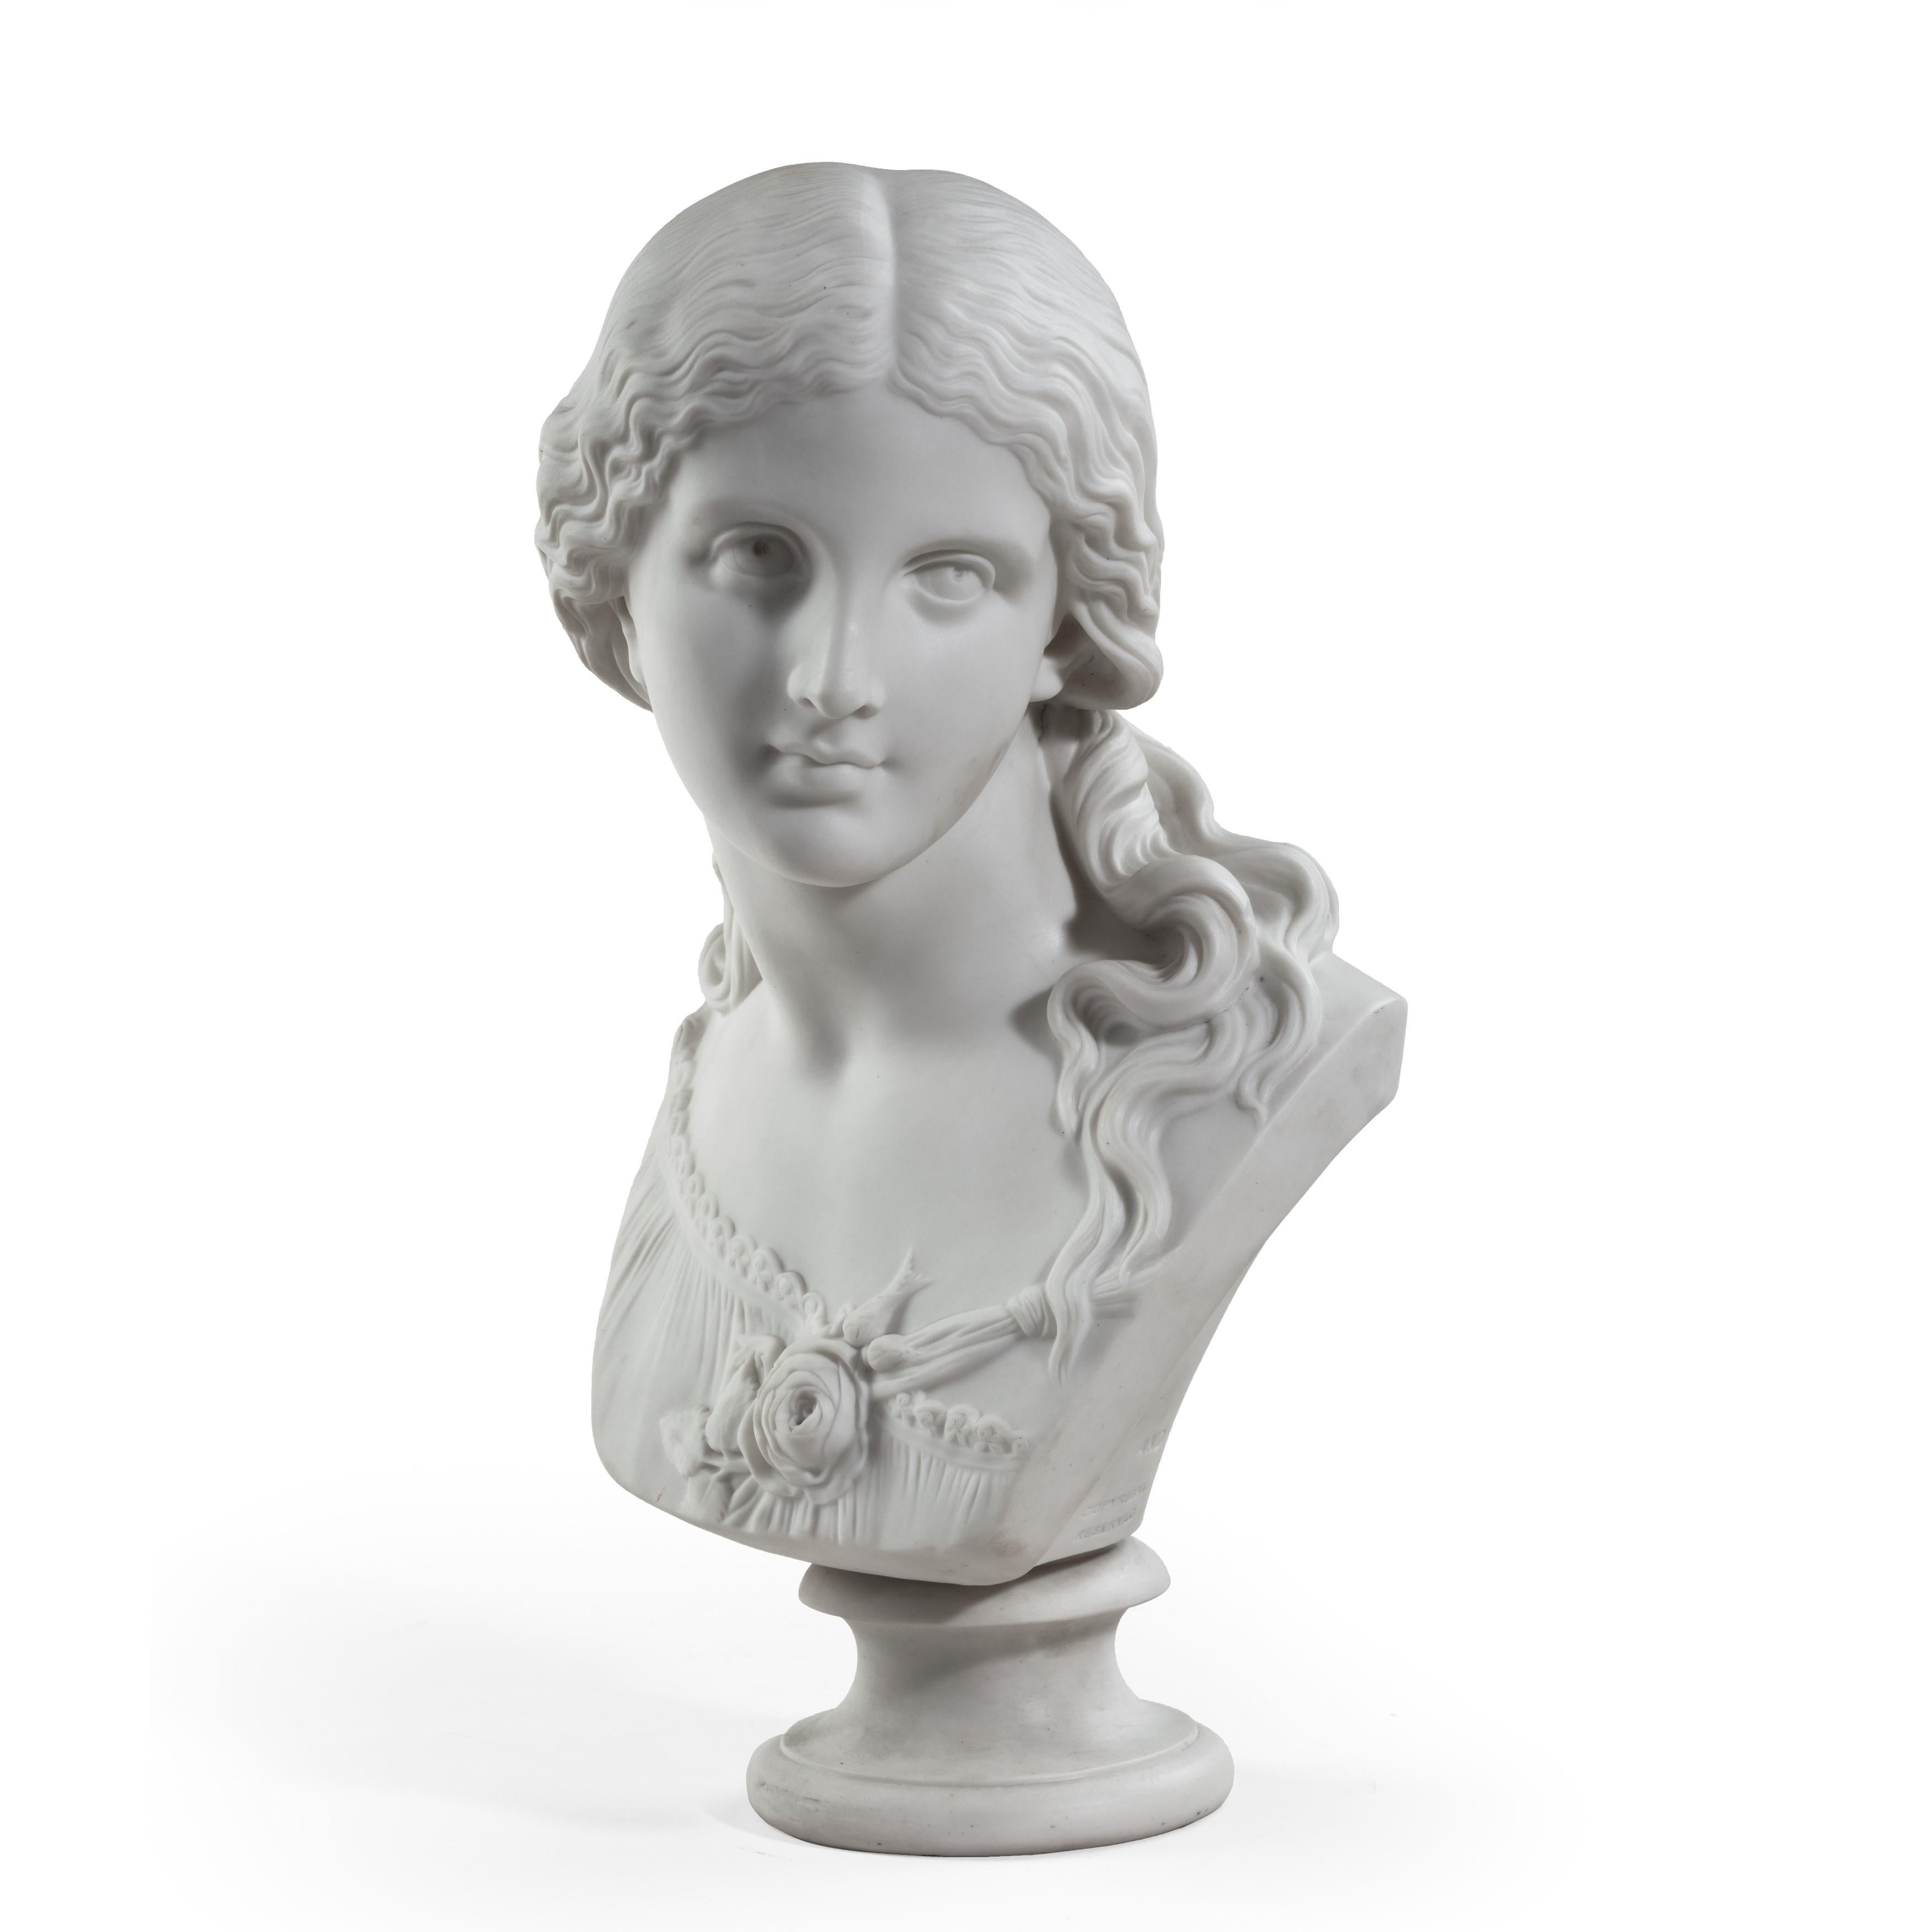 An attractive Copeland Parian ware bust of “Love” by Raffaelle Monti, dated 1871, showing a girl with her head turned to the left and tendrils of hair falling over her left shoulder, with a rose spray tied across her bodice, the reverse stamped ‘R